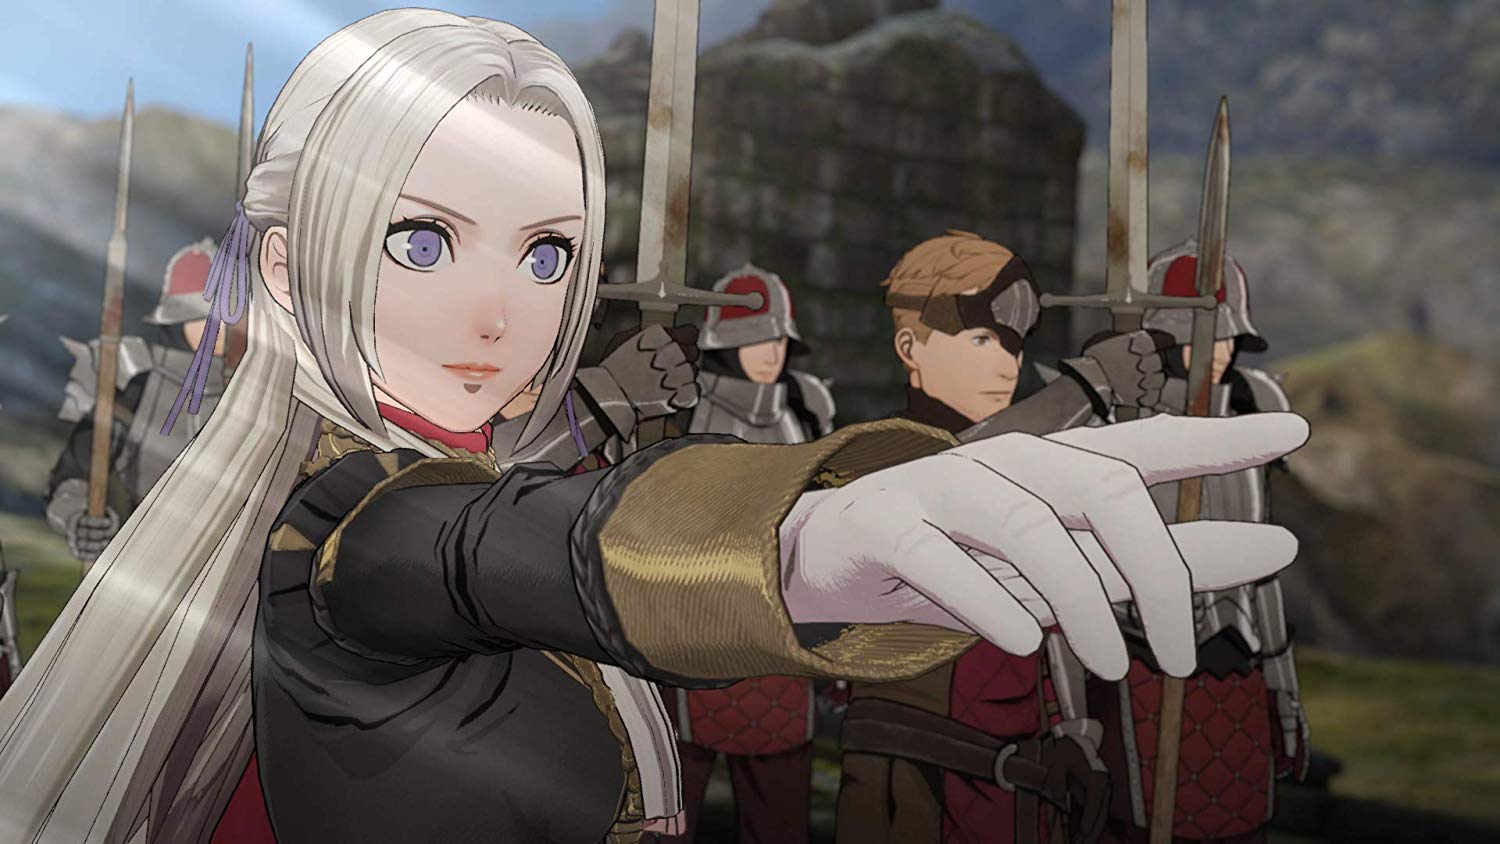 Edelgard is a revolutionary as she leads her troops in Fire Emblem.